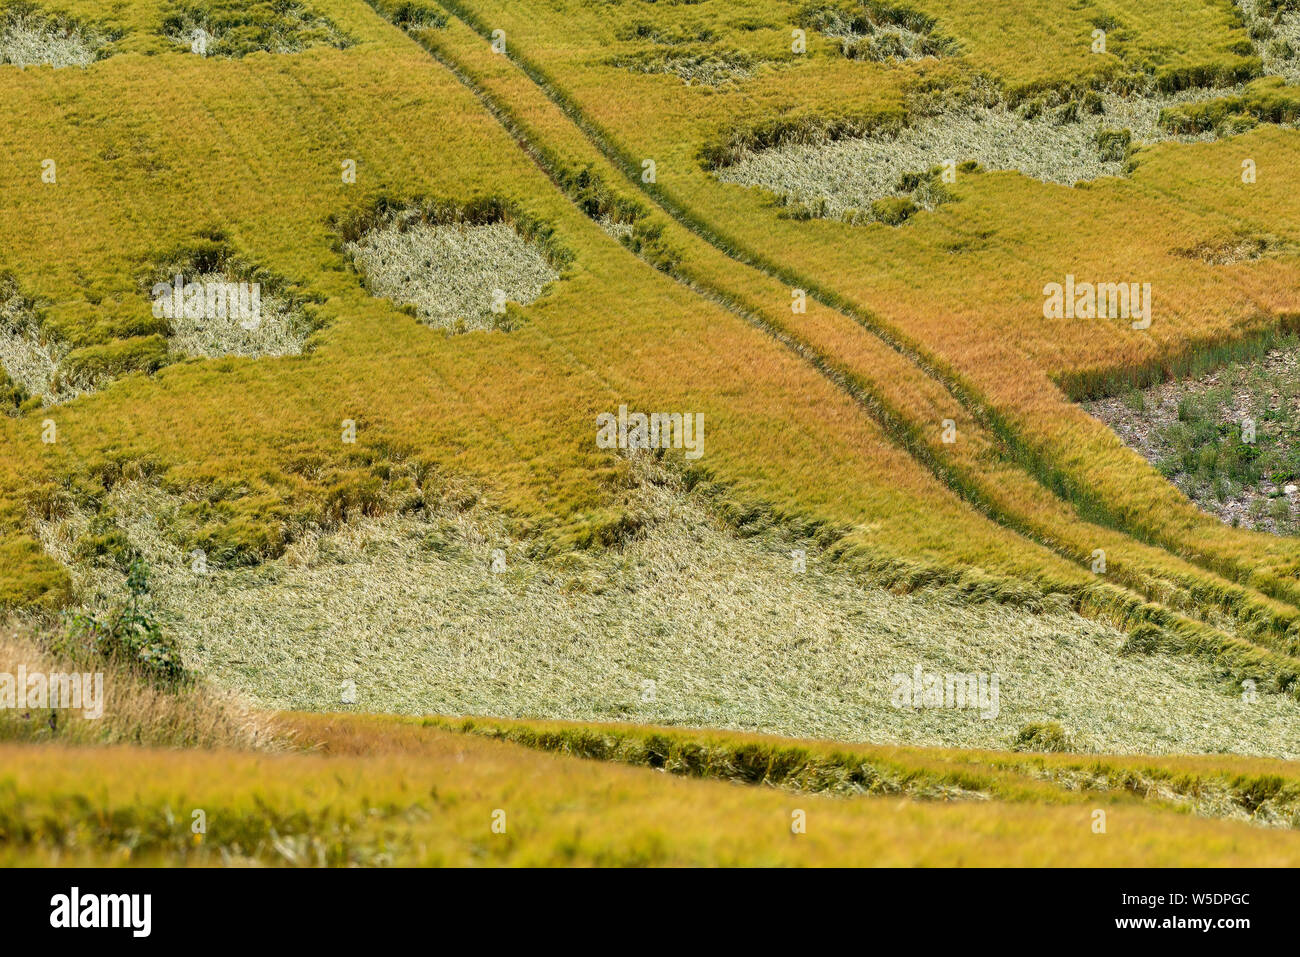 Cheltenham, Gloucestershire, England, UK.  Storm damaged crops in a farmers field much of the crop is laying flat after strong winds and heavy rain. Stock Photo